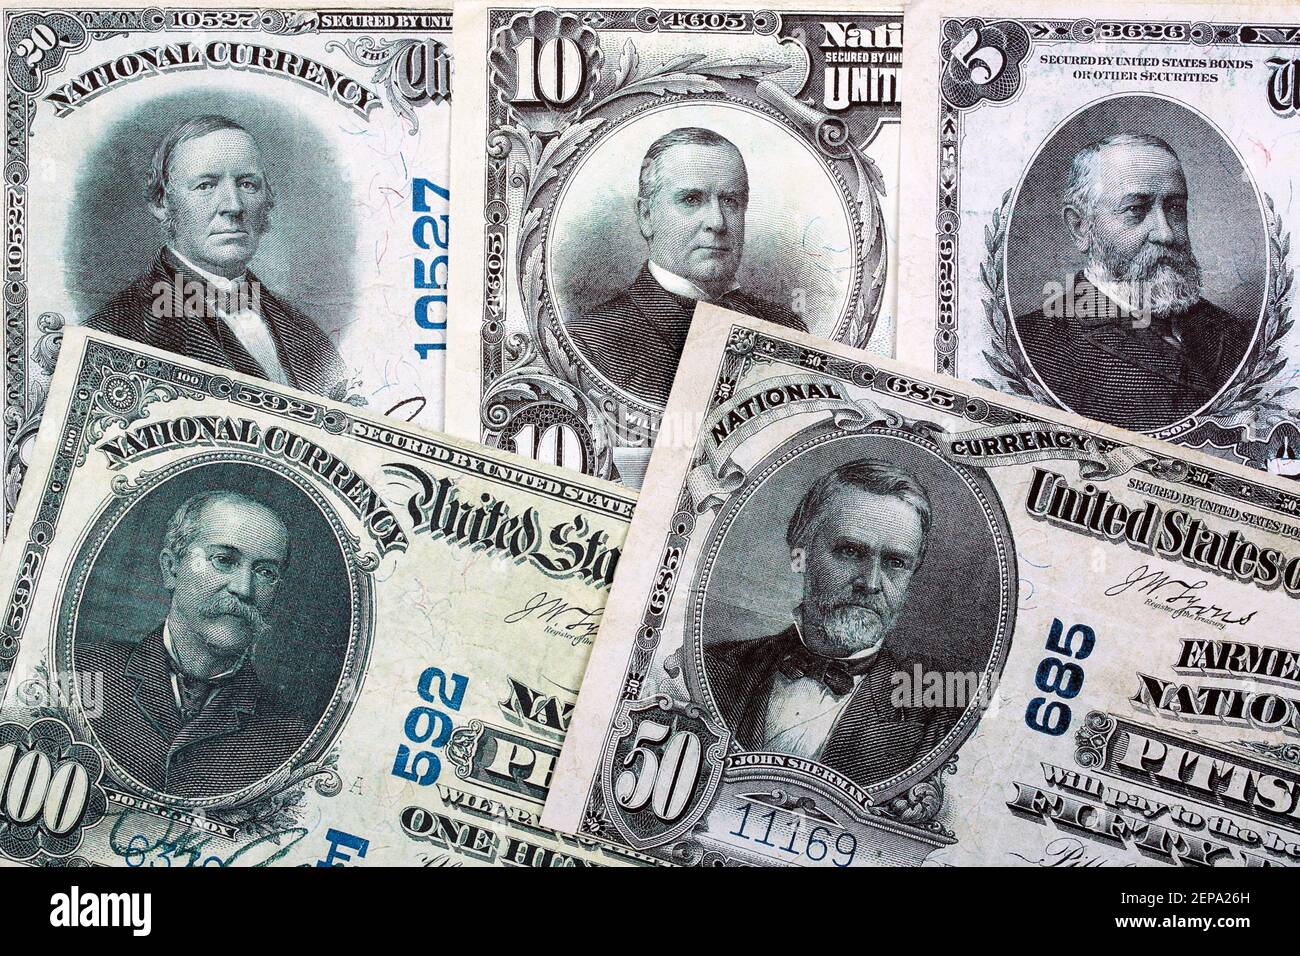 National Bank Notes - USA currency issued in 1902 Stock Photo